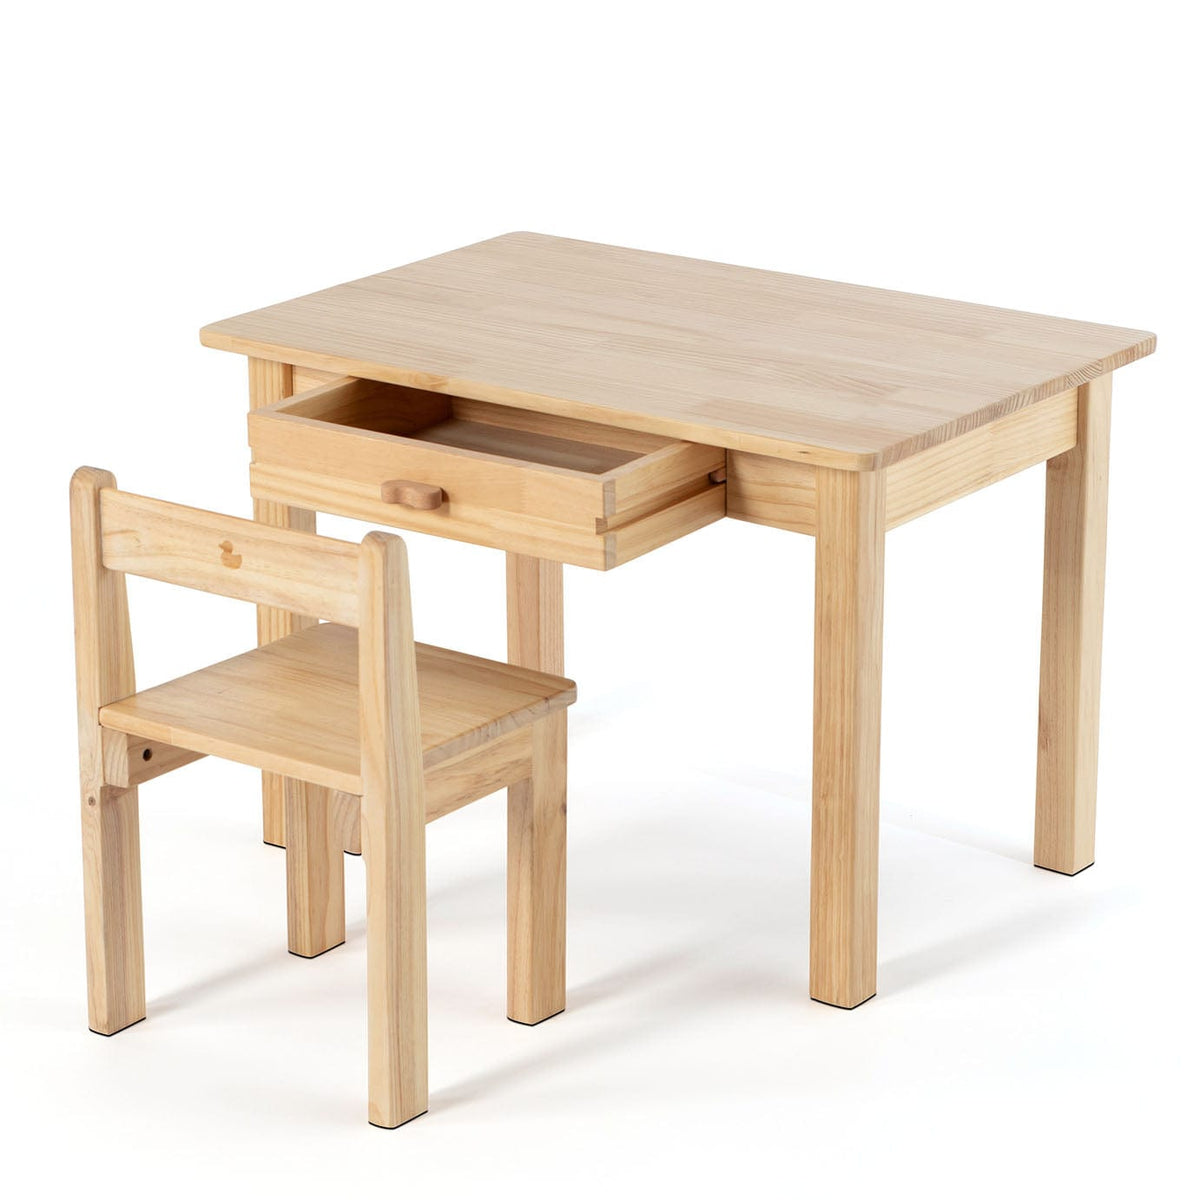 My Duckling LINA Kids Study Table and Chair Set - Pinewood